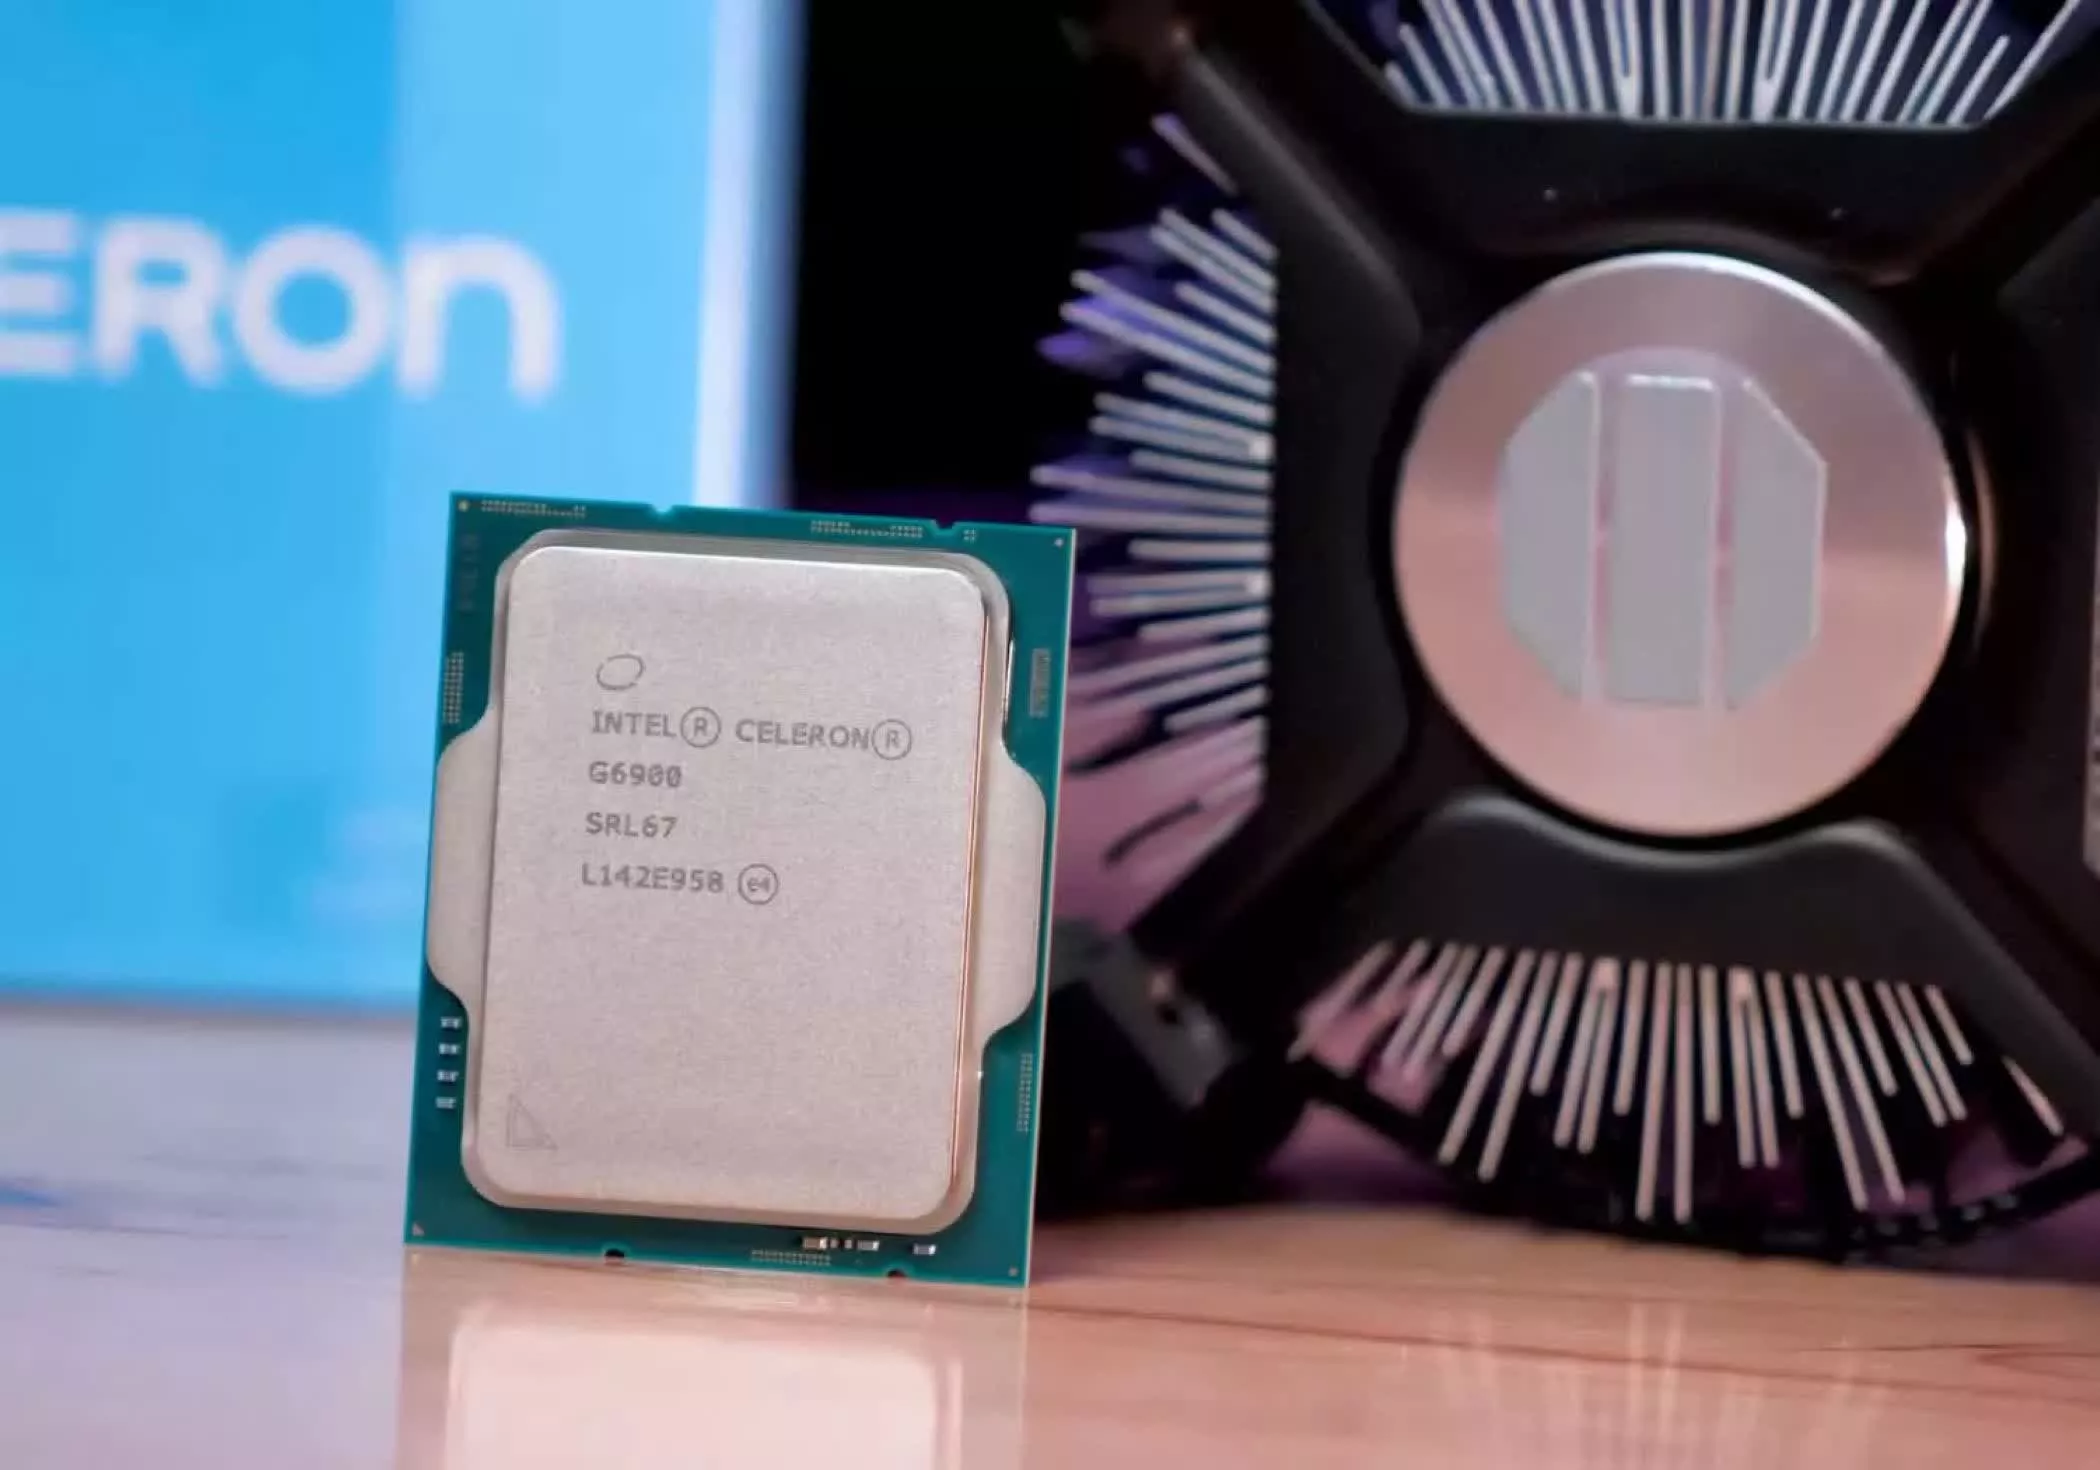 Intel's 15th-gen Arrow lake CPUs: How much faster will they be over Alder lake?